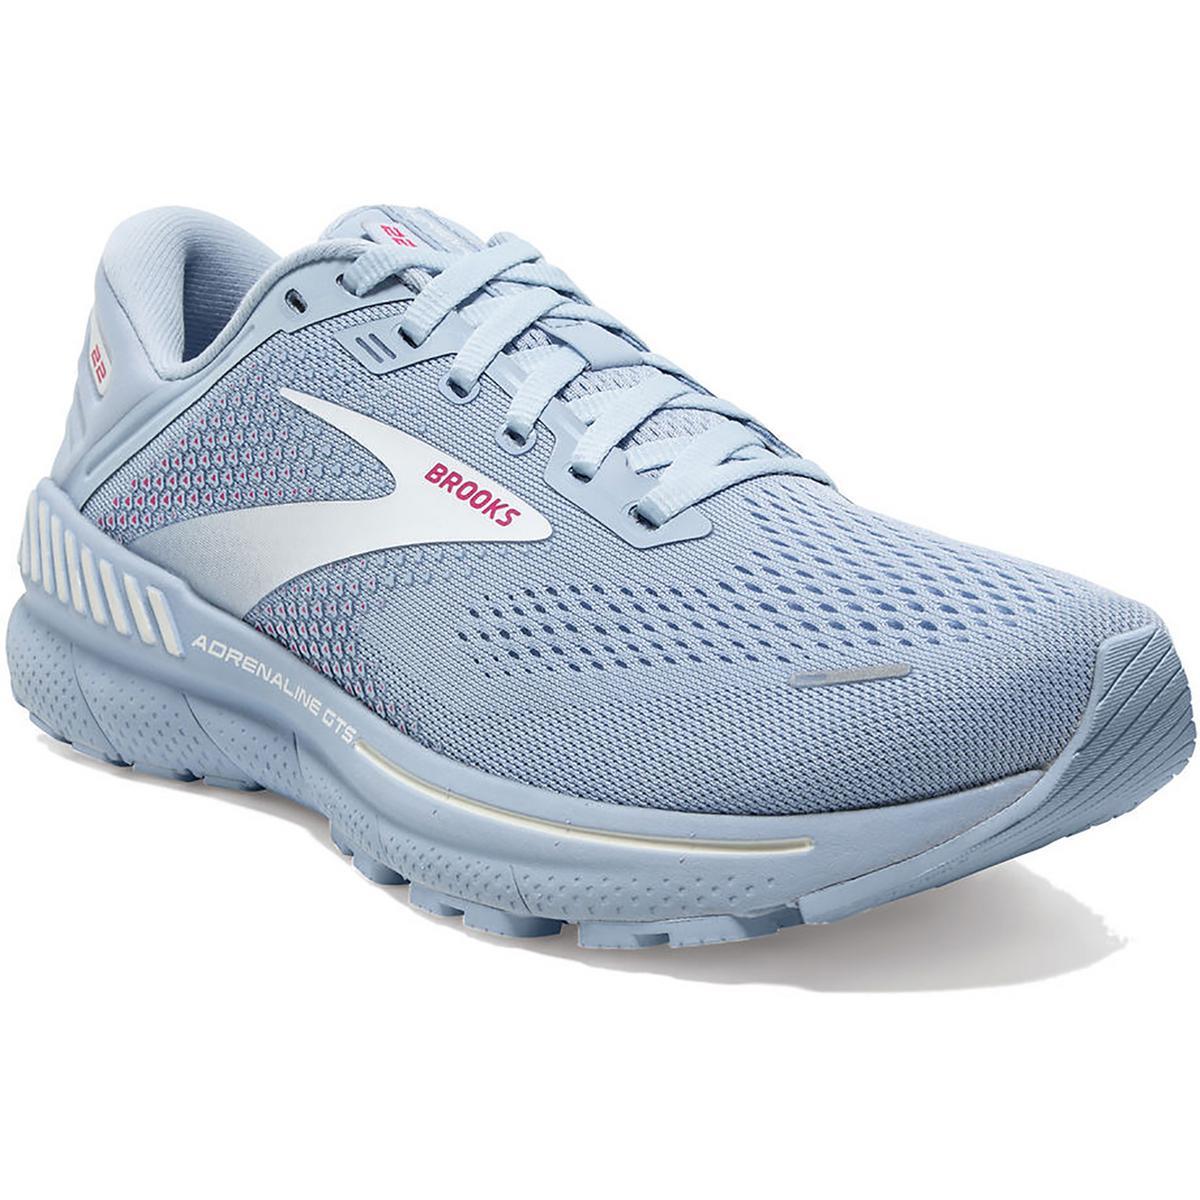 Brooks Womens Adrenaline Gts 22 Athletic and Training Shoes Sneakers Bhfo 7537 Blue/White/Rose